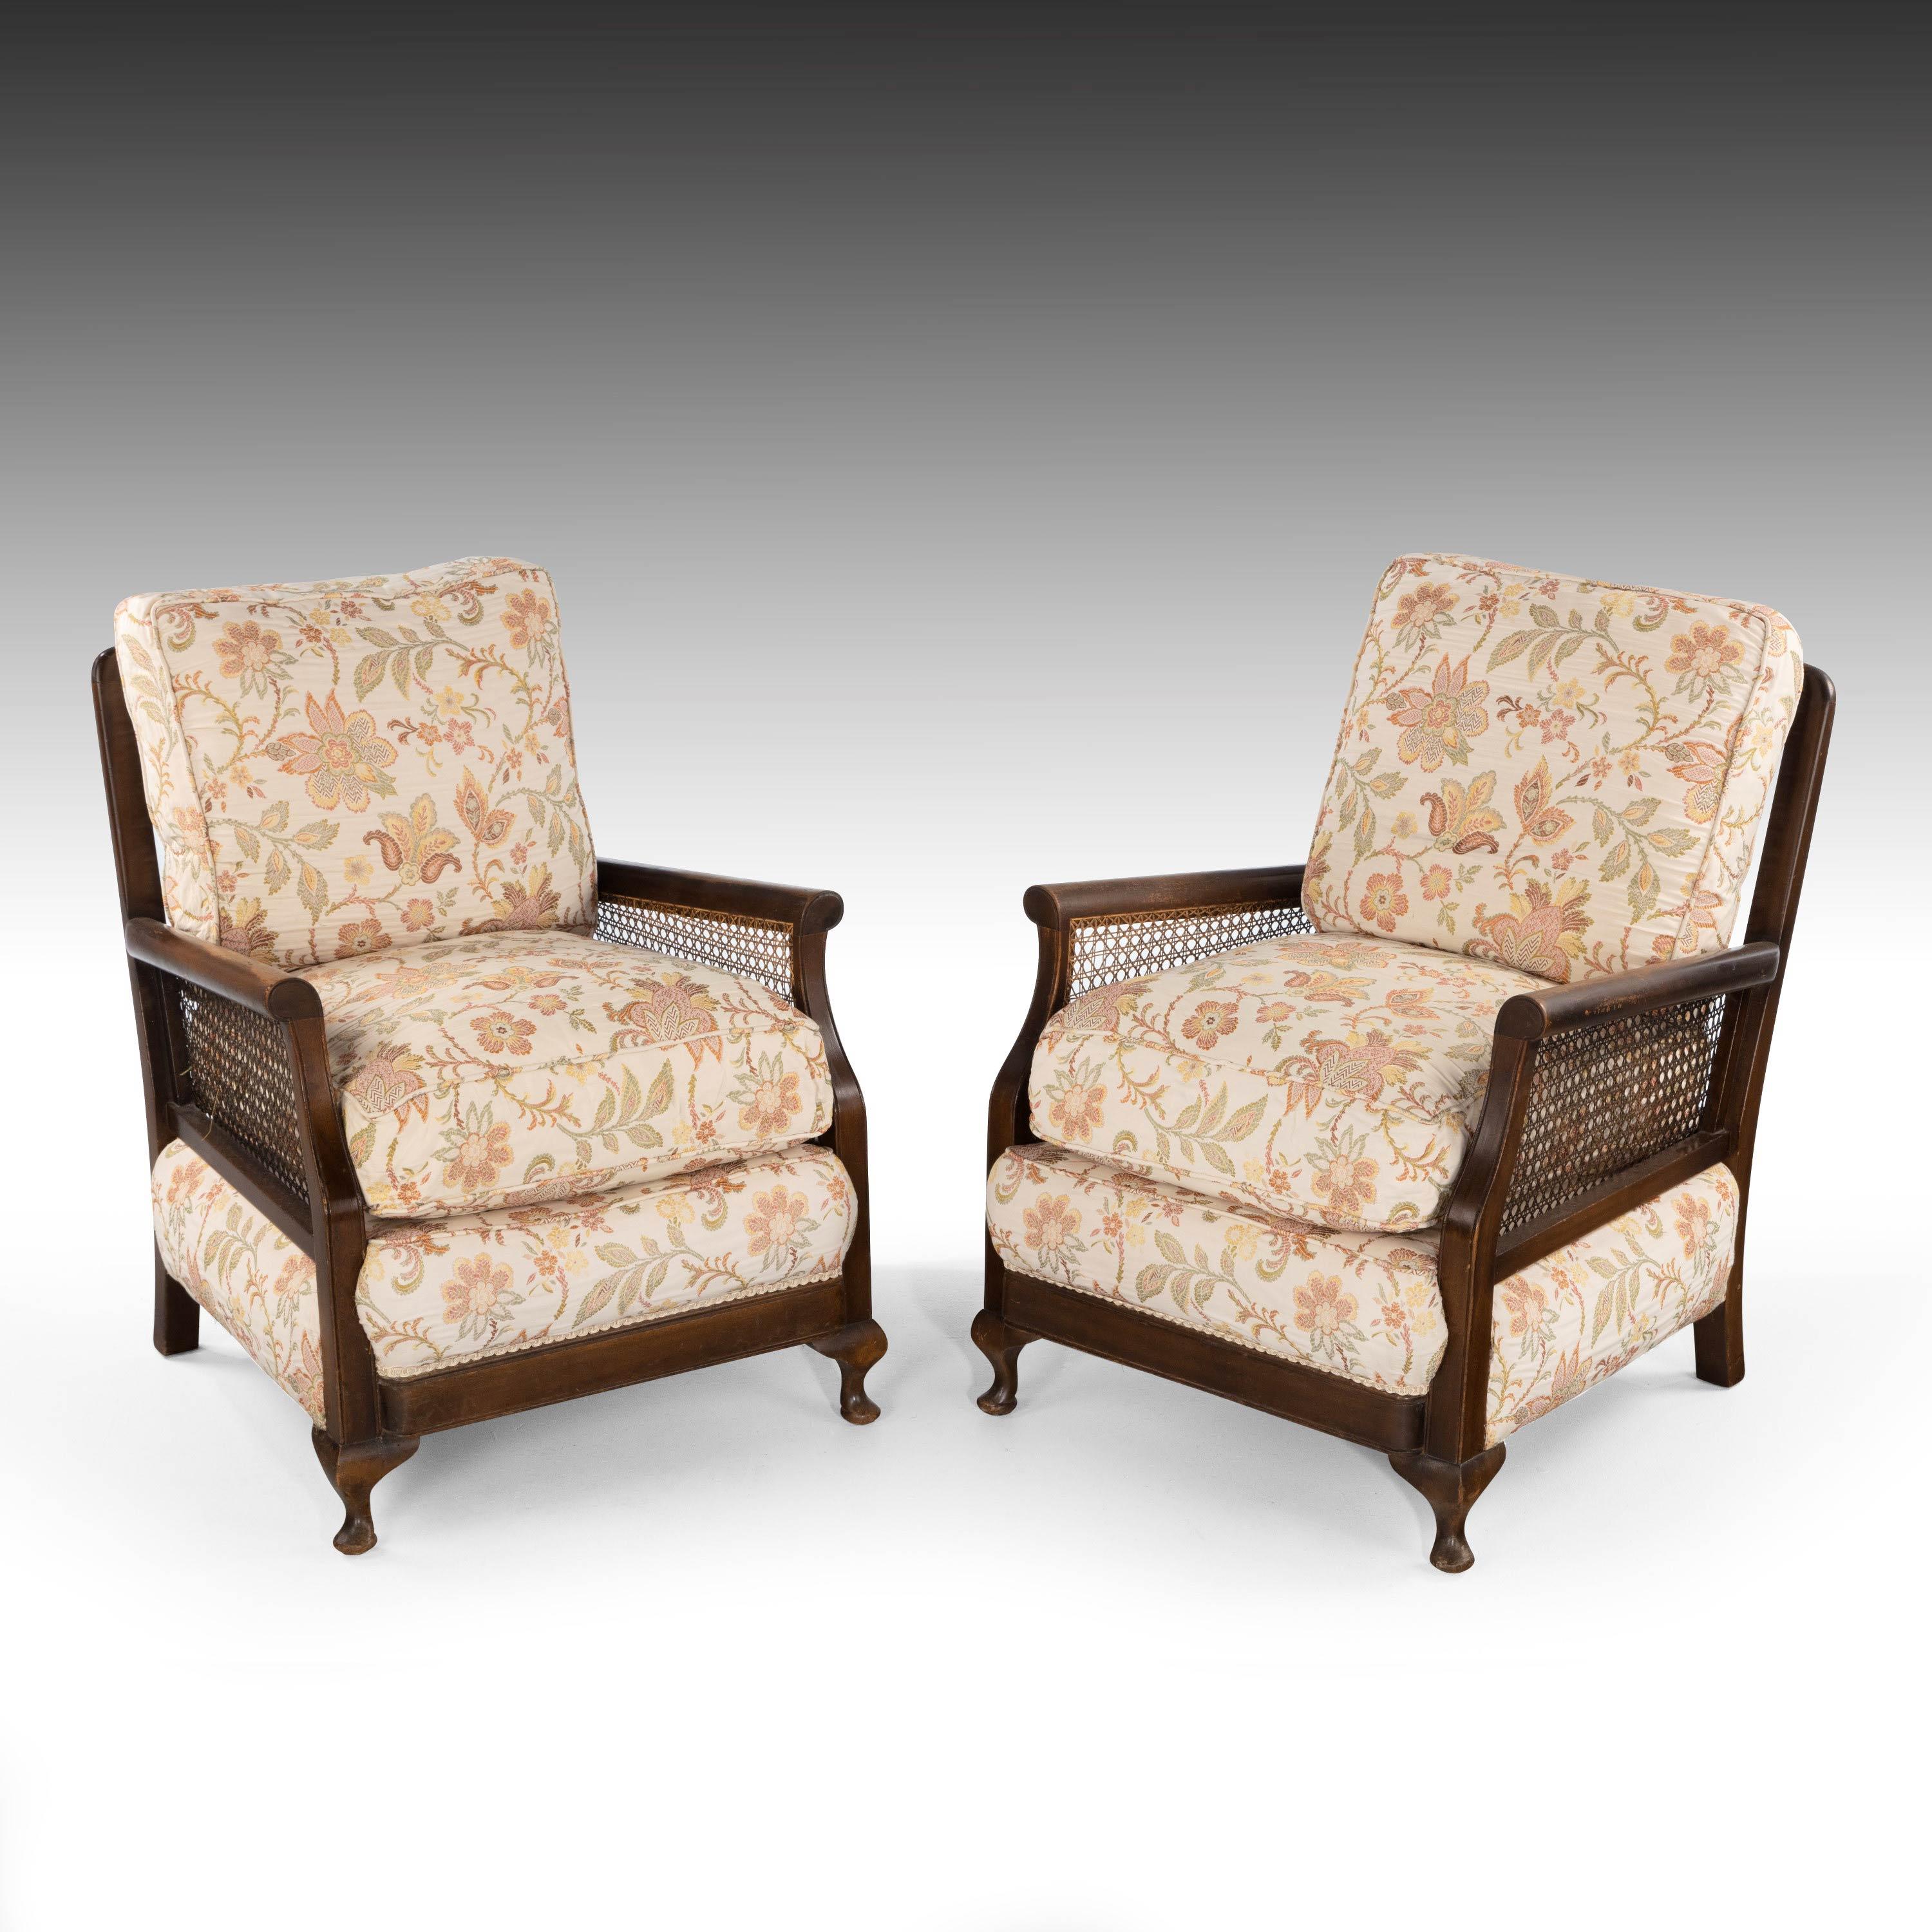 English Attractive Late 20th Century Pair of Mahogany and Canework Chairs